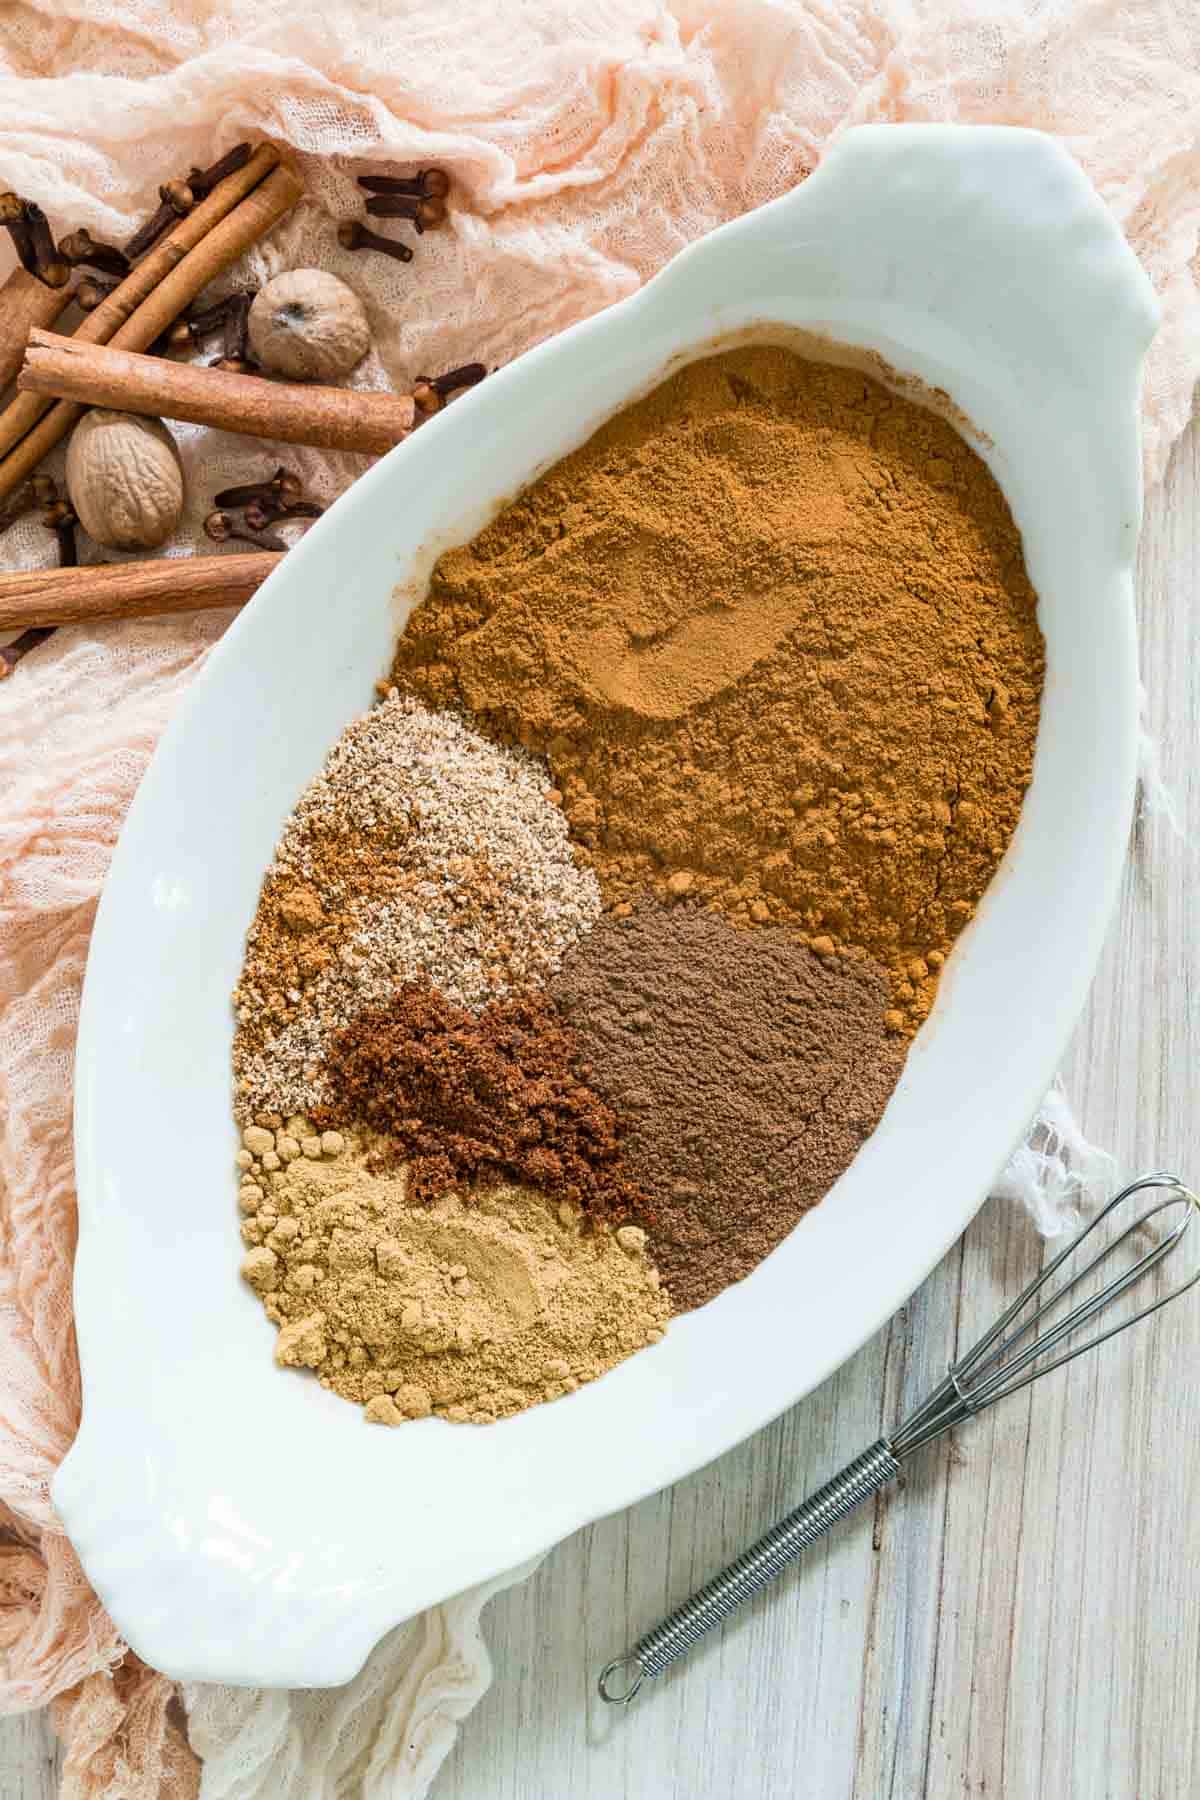 Ingredients for pumpkin pie spice mix are shown in a white bowl: ground cinnamon, ginger, nutmeg, cloves, and allspice.